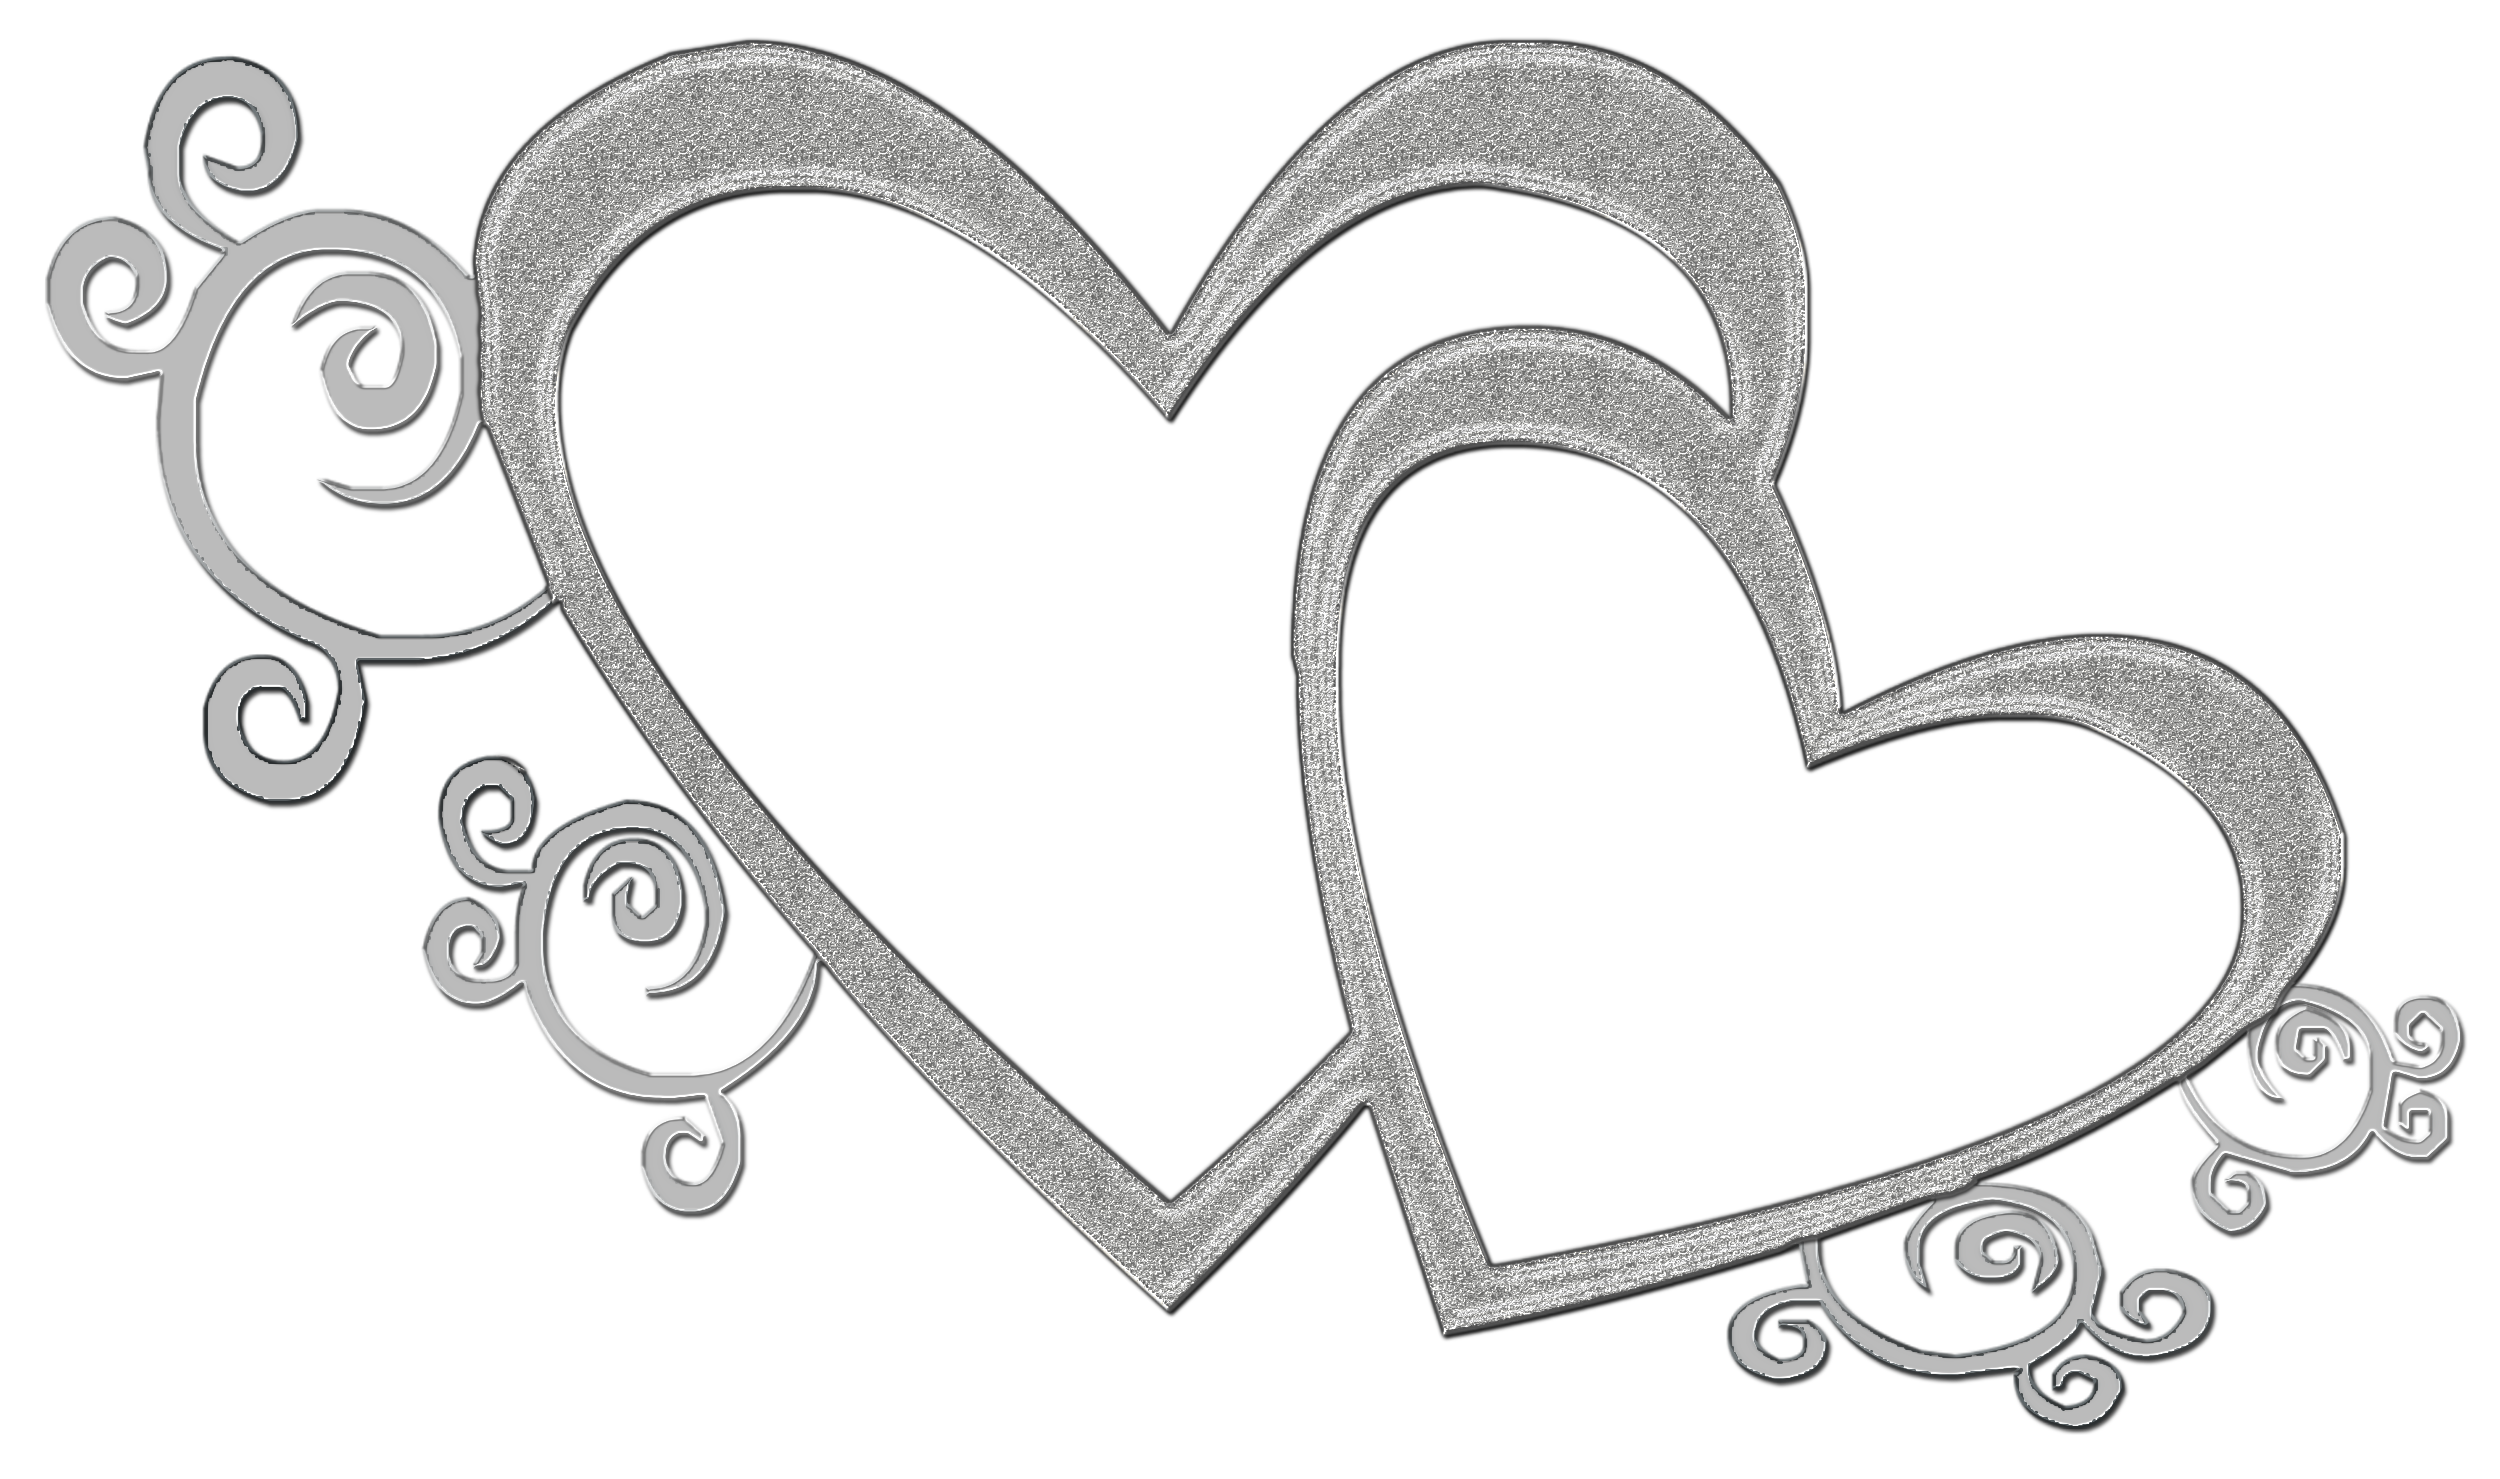 entwined hearts clip art free - photo #37